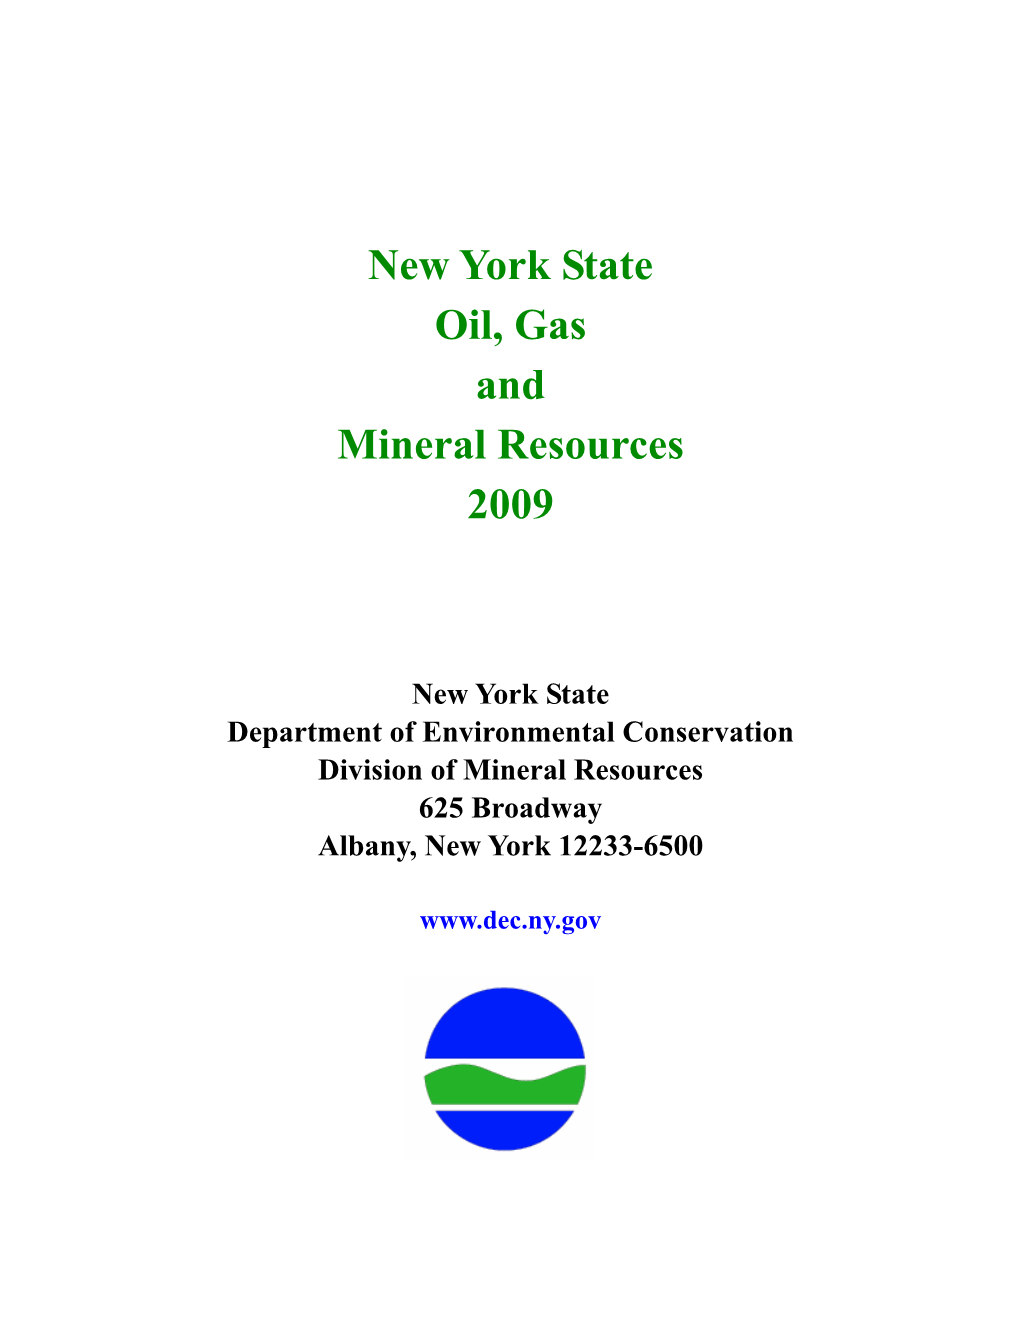 New York State Oil, Gas and Mineral Resources 2009